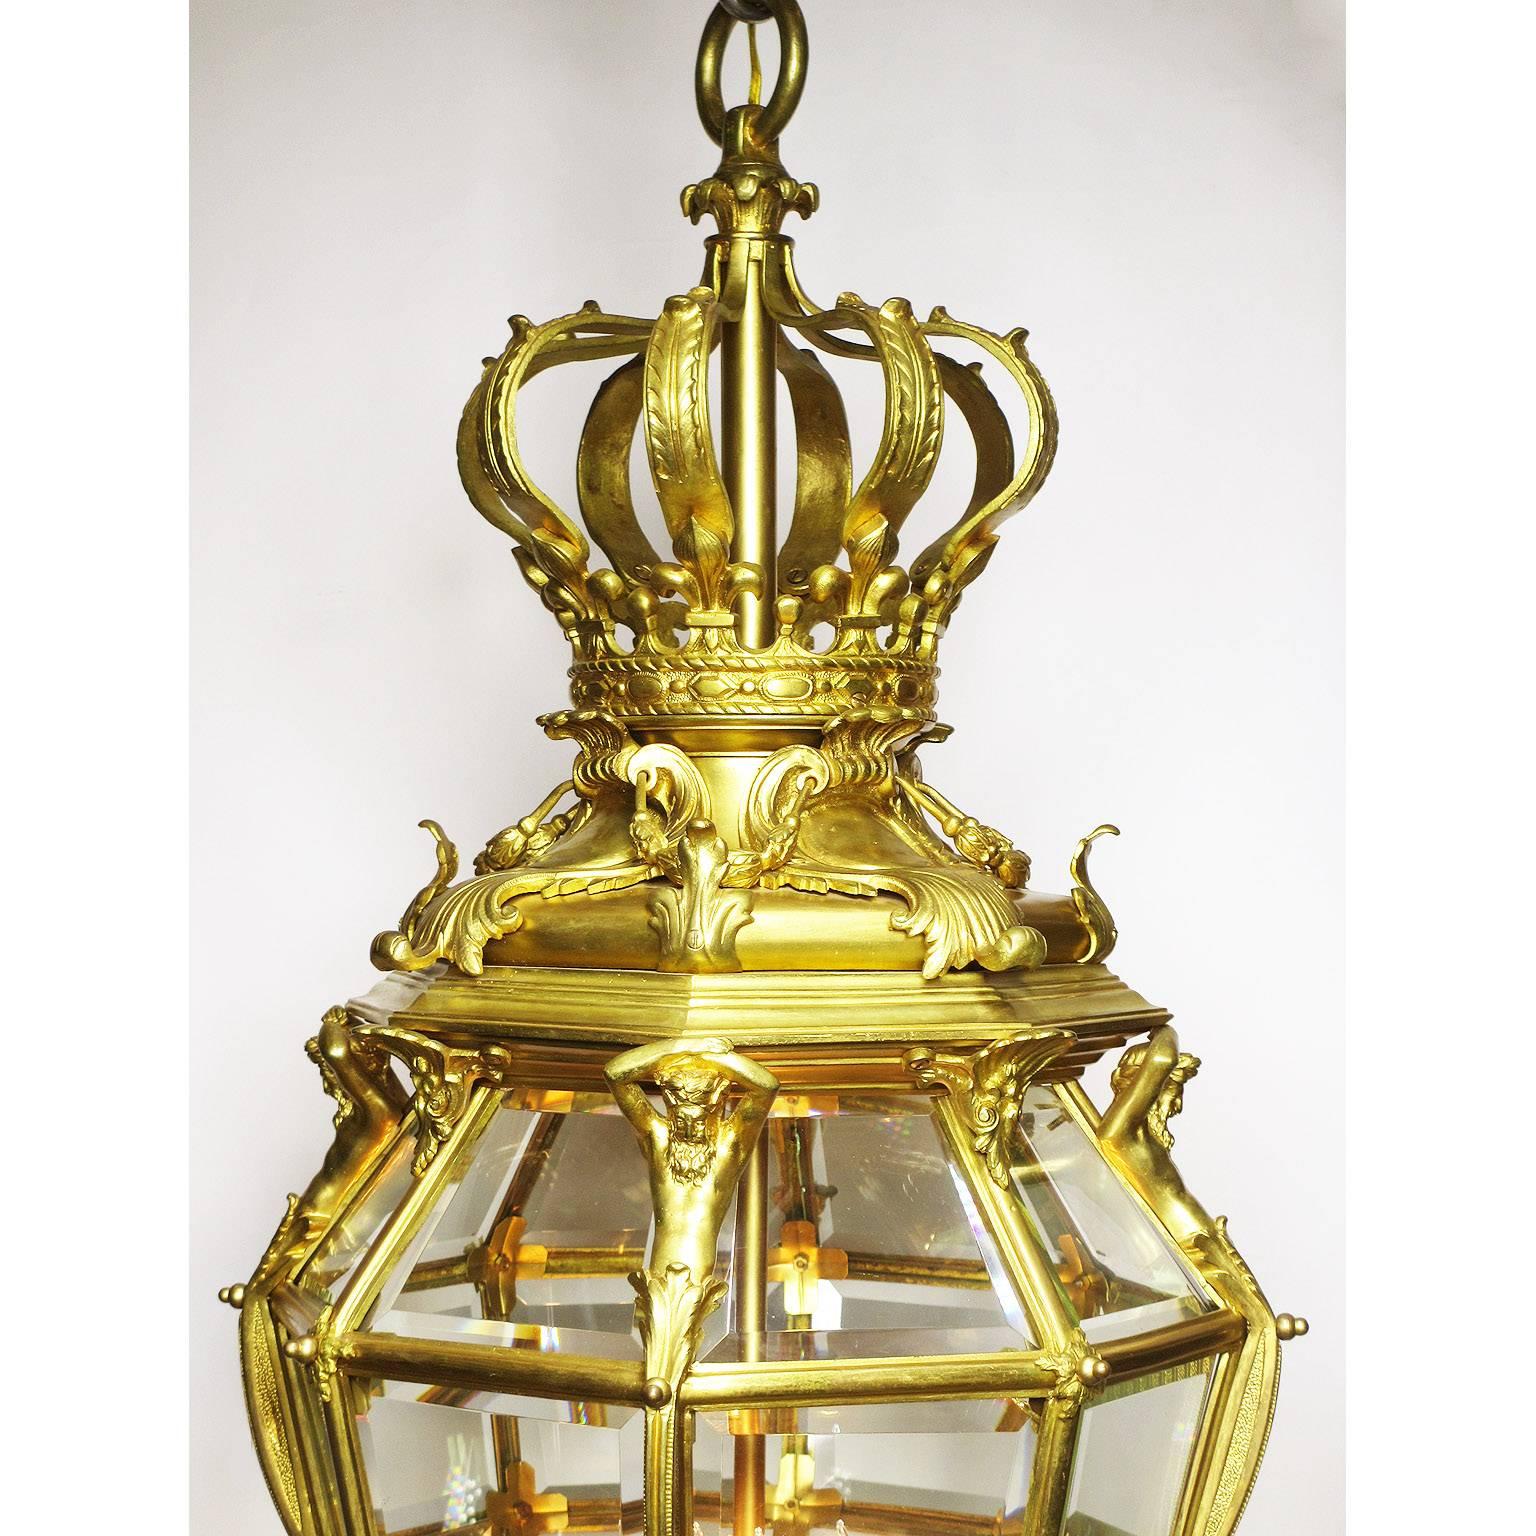 A fine and large French Louis XIV style 19th century gilt-bronze and beveled glass 